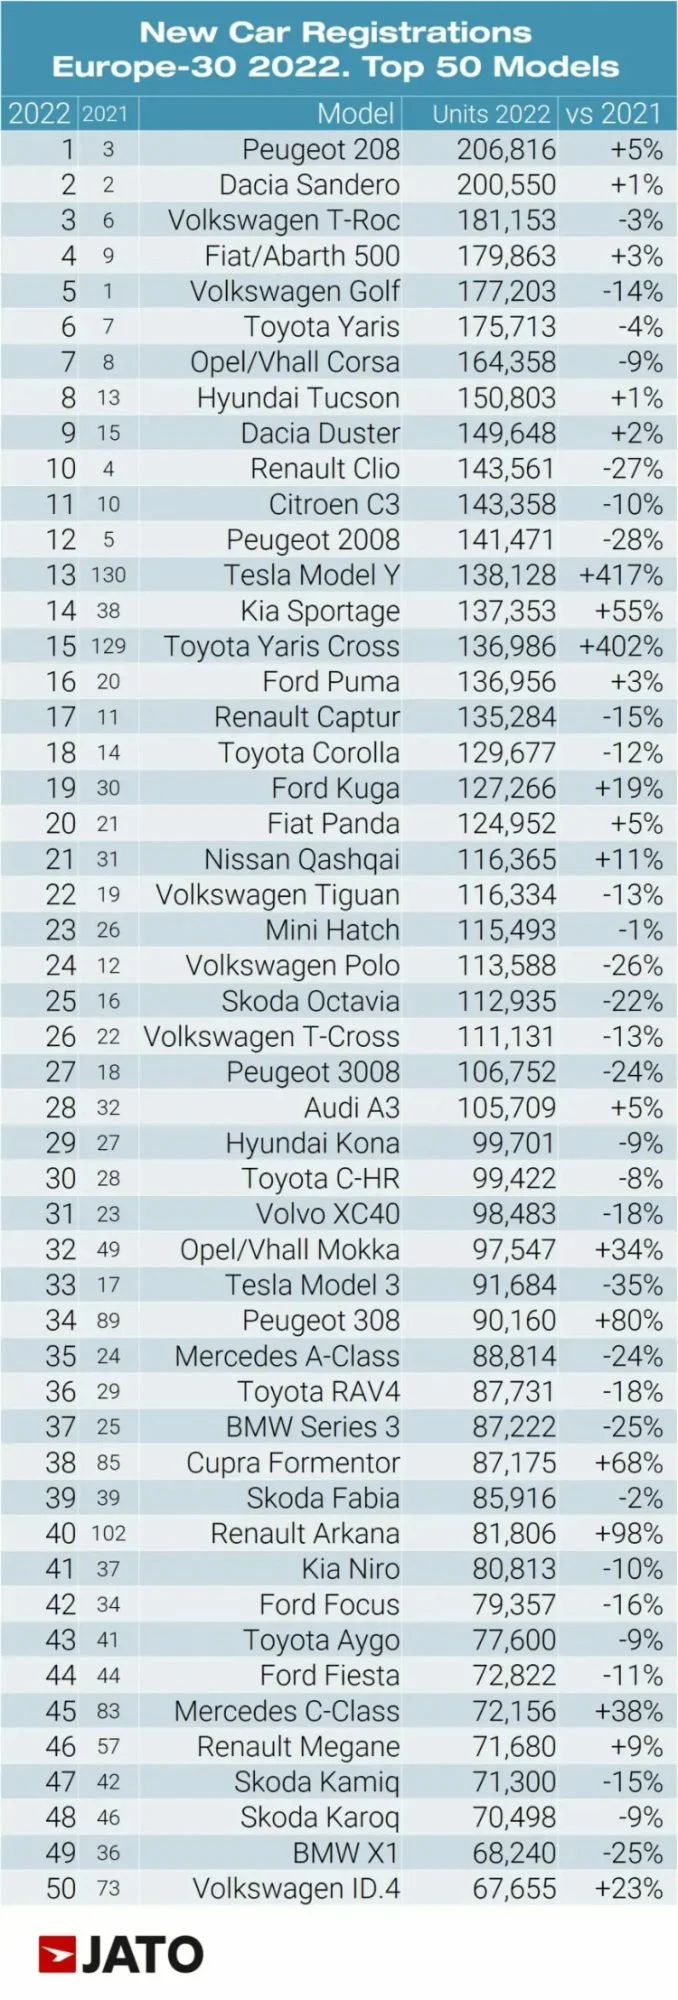 The top 50 best-selling car models in Europe in 2022 according 